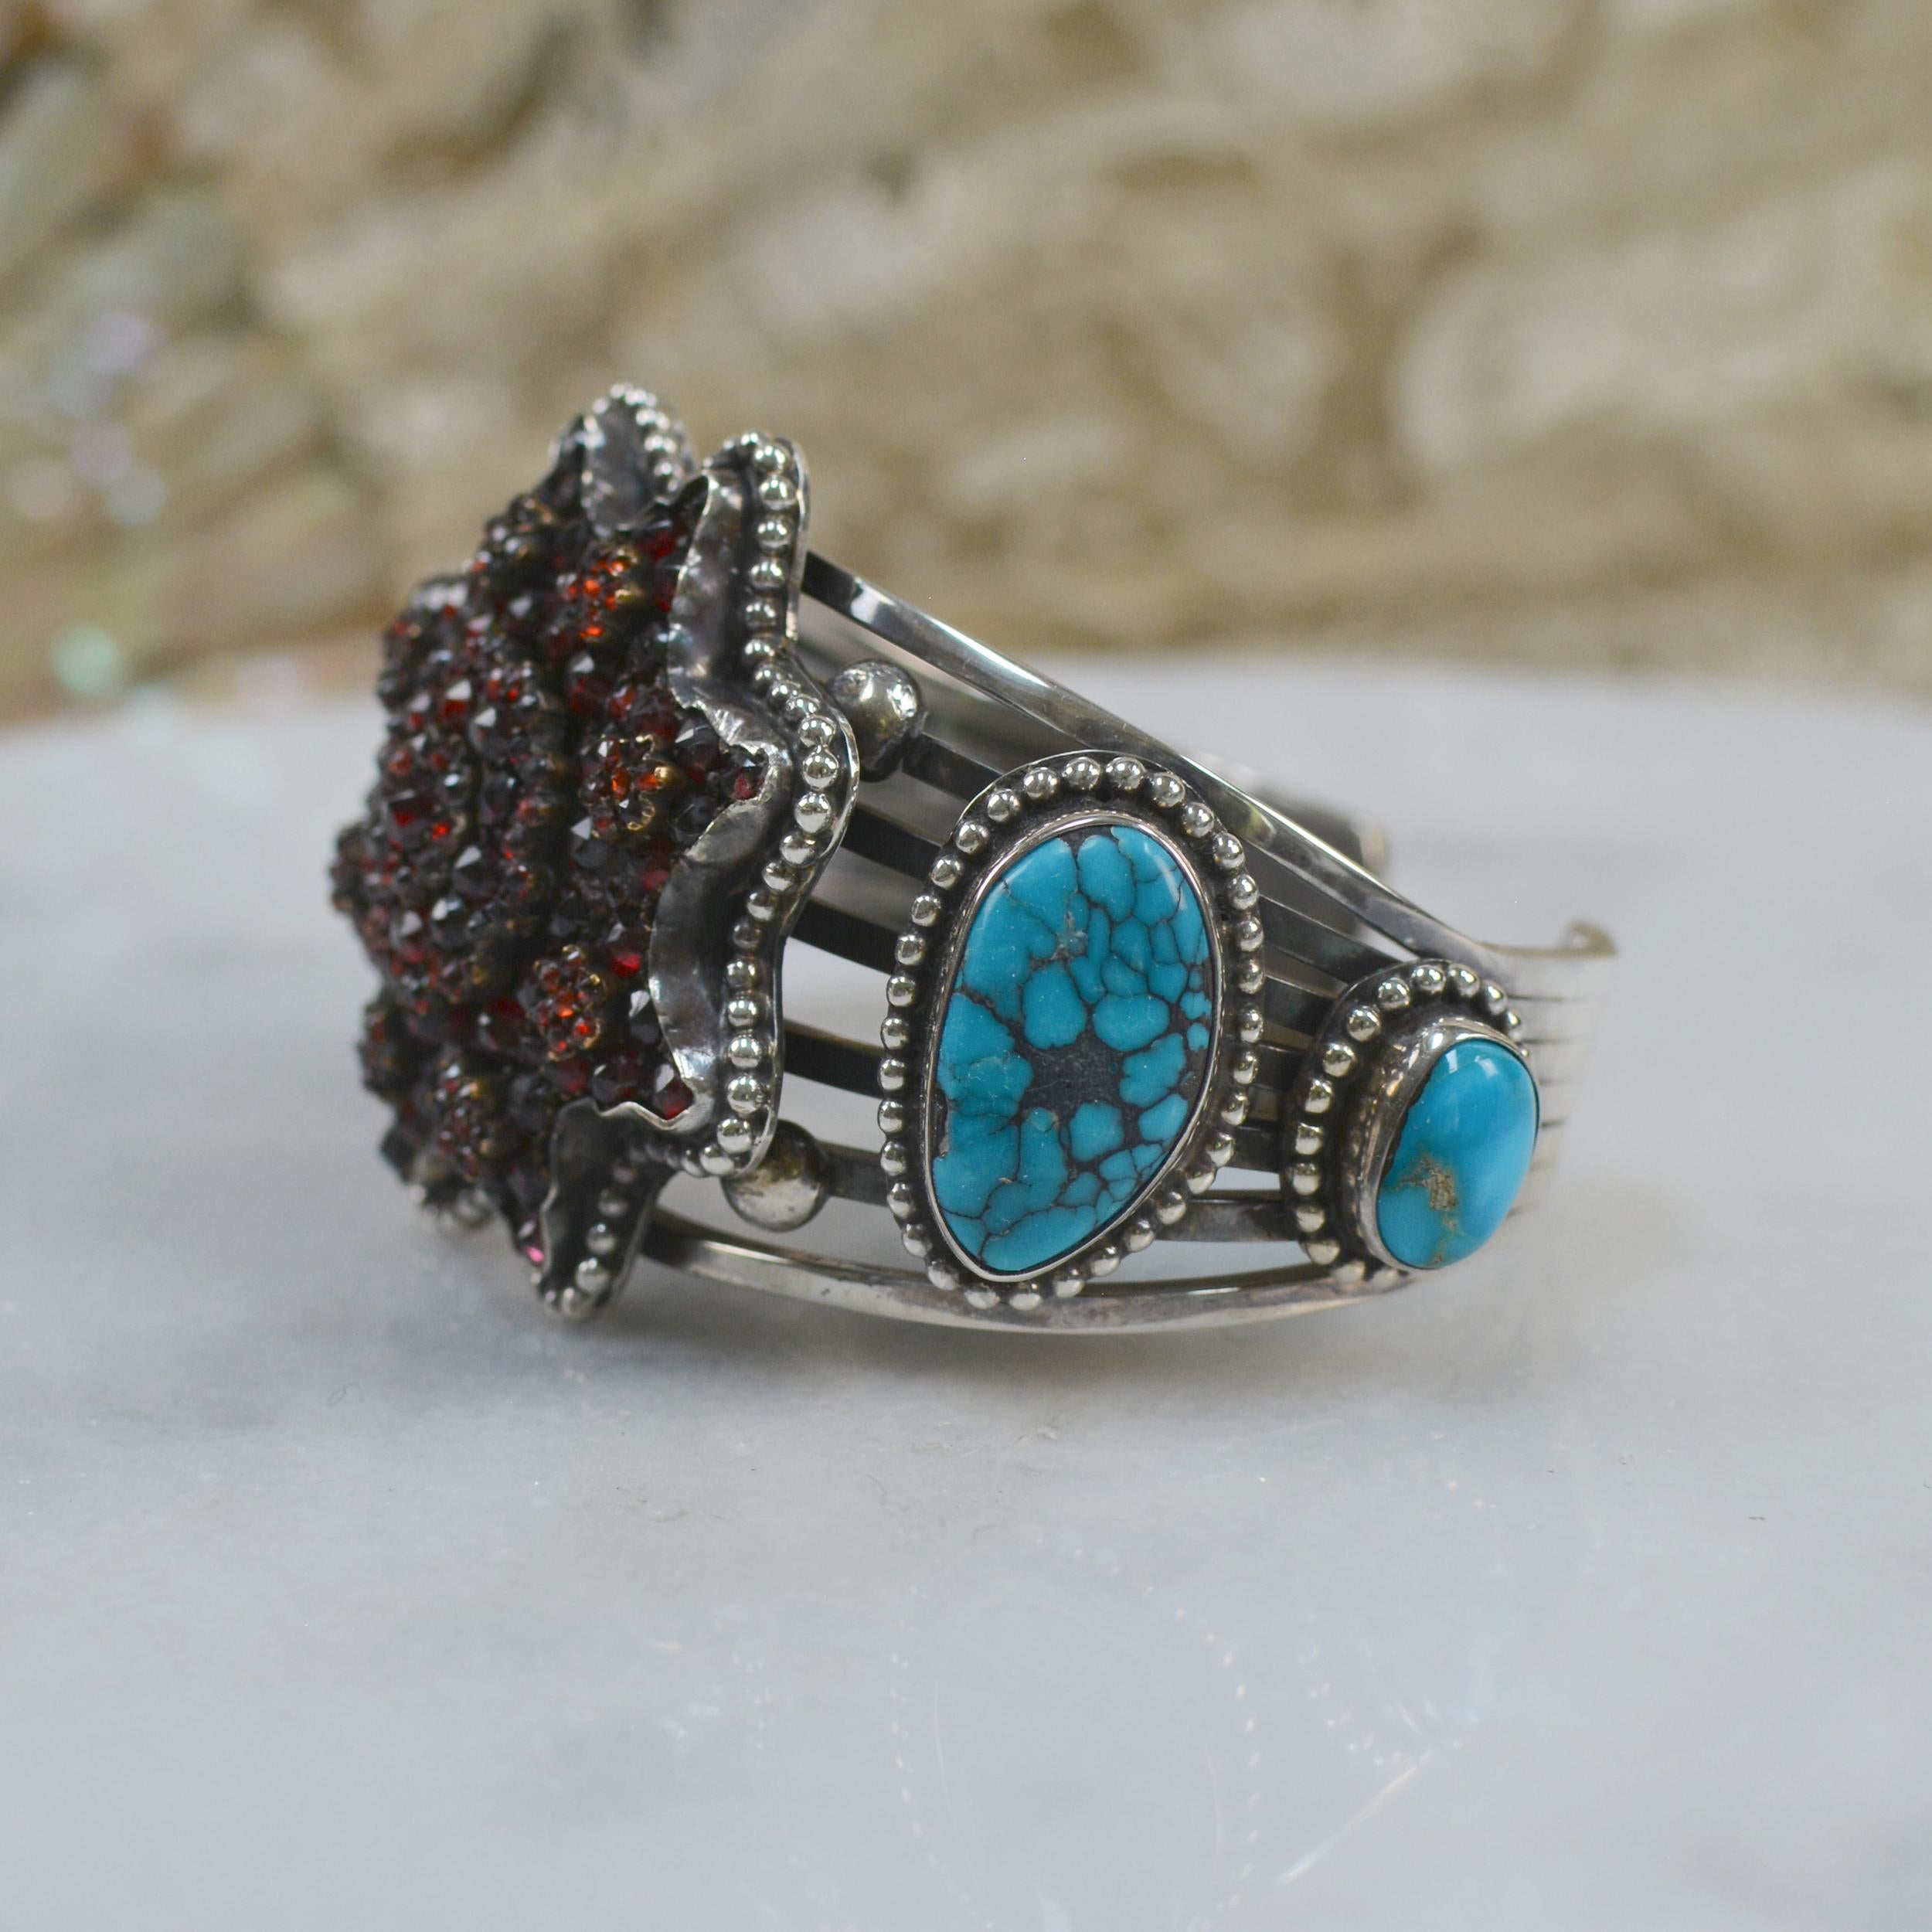 High Victorian Jill Garber Antique Bohemian Garnet Eight Point Star and Turquoise Cuff Bracelet For Sale